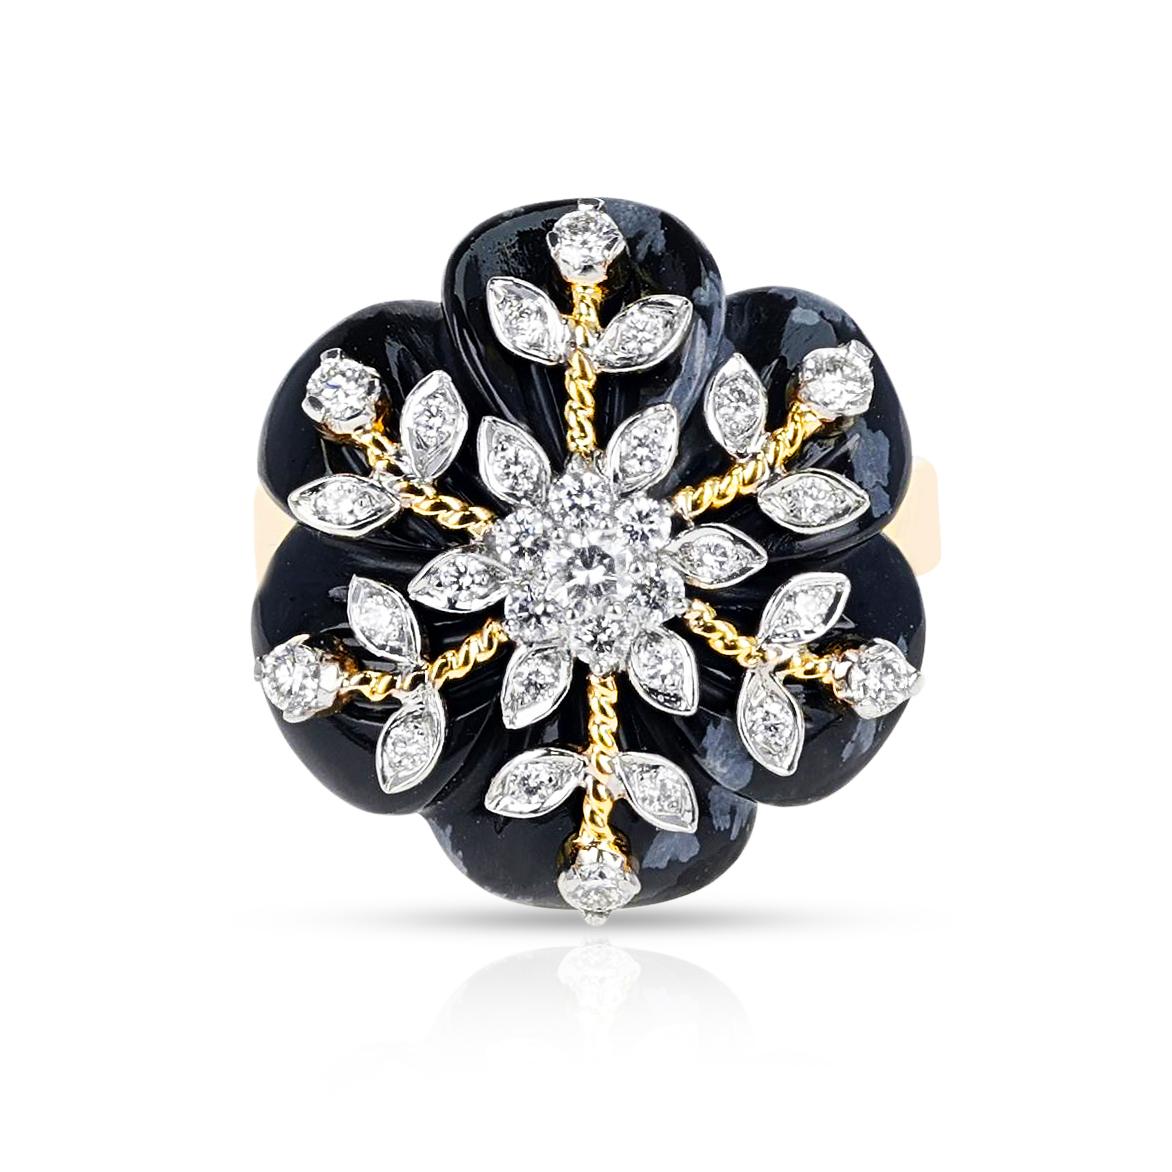 A 11.35 carat Snowflake Obsidian Ring with 0.39 carats of Diamonds made in 14 Karat Yellow Gold. The total weight of the ring is 5.02 grams. Ring Size 6.25. 